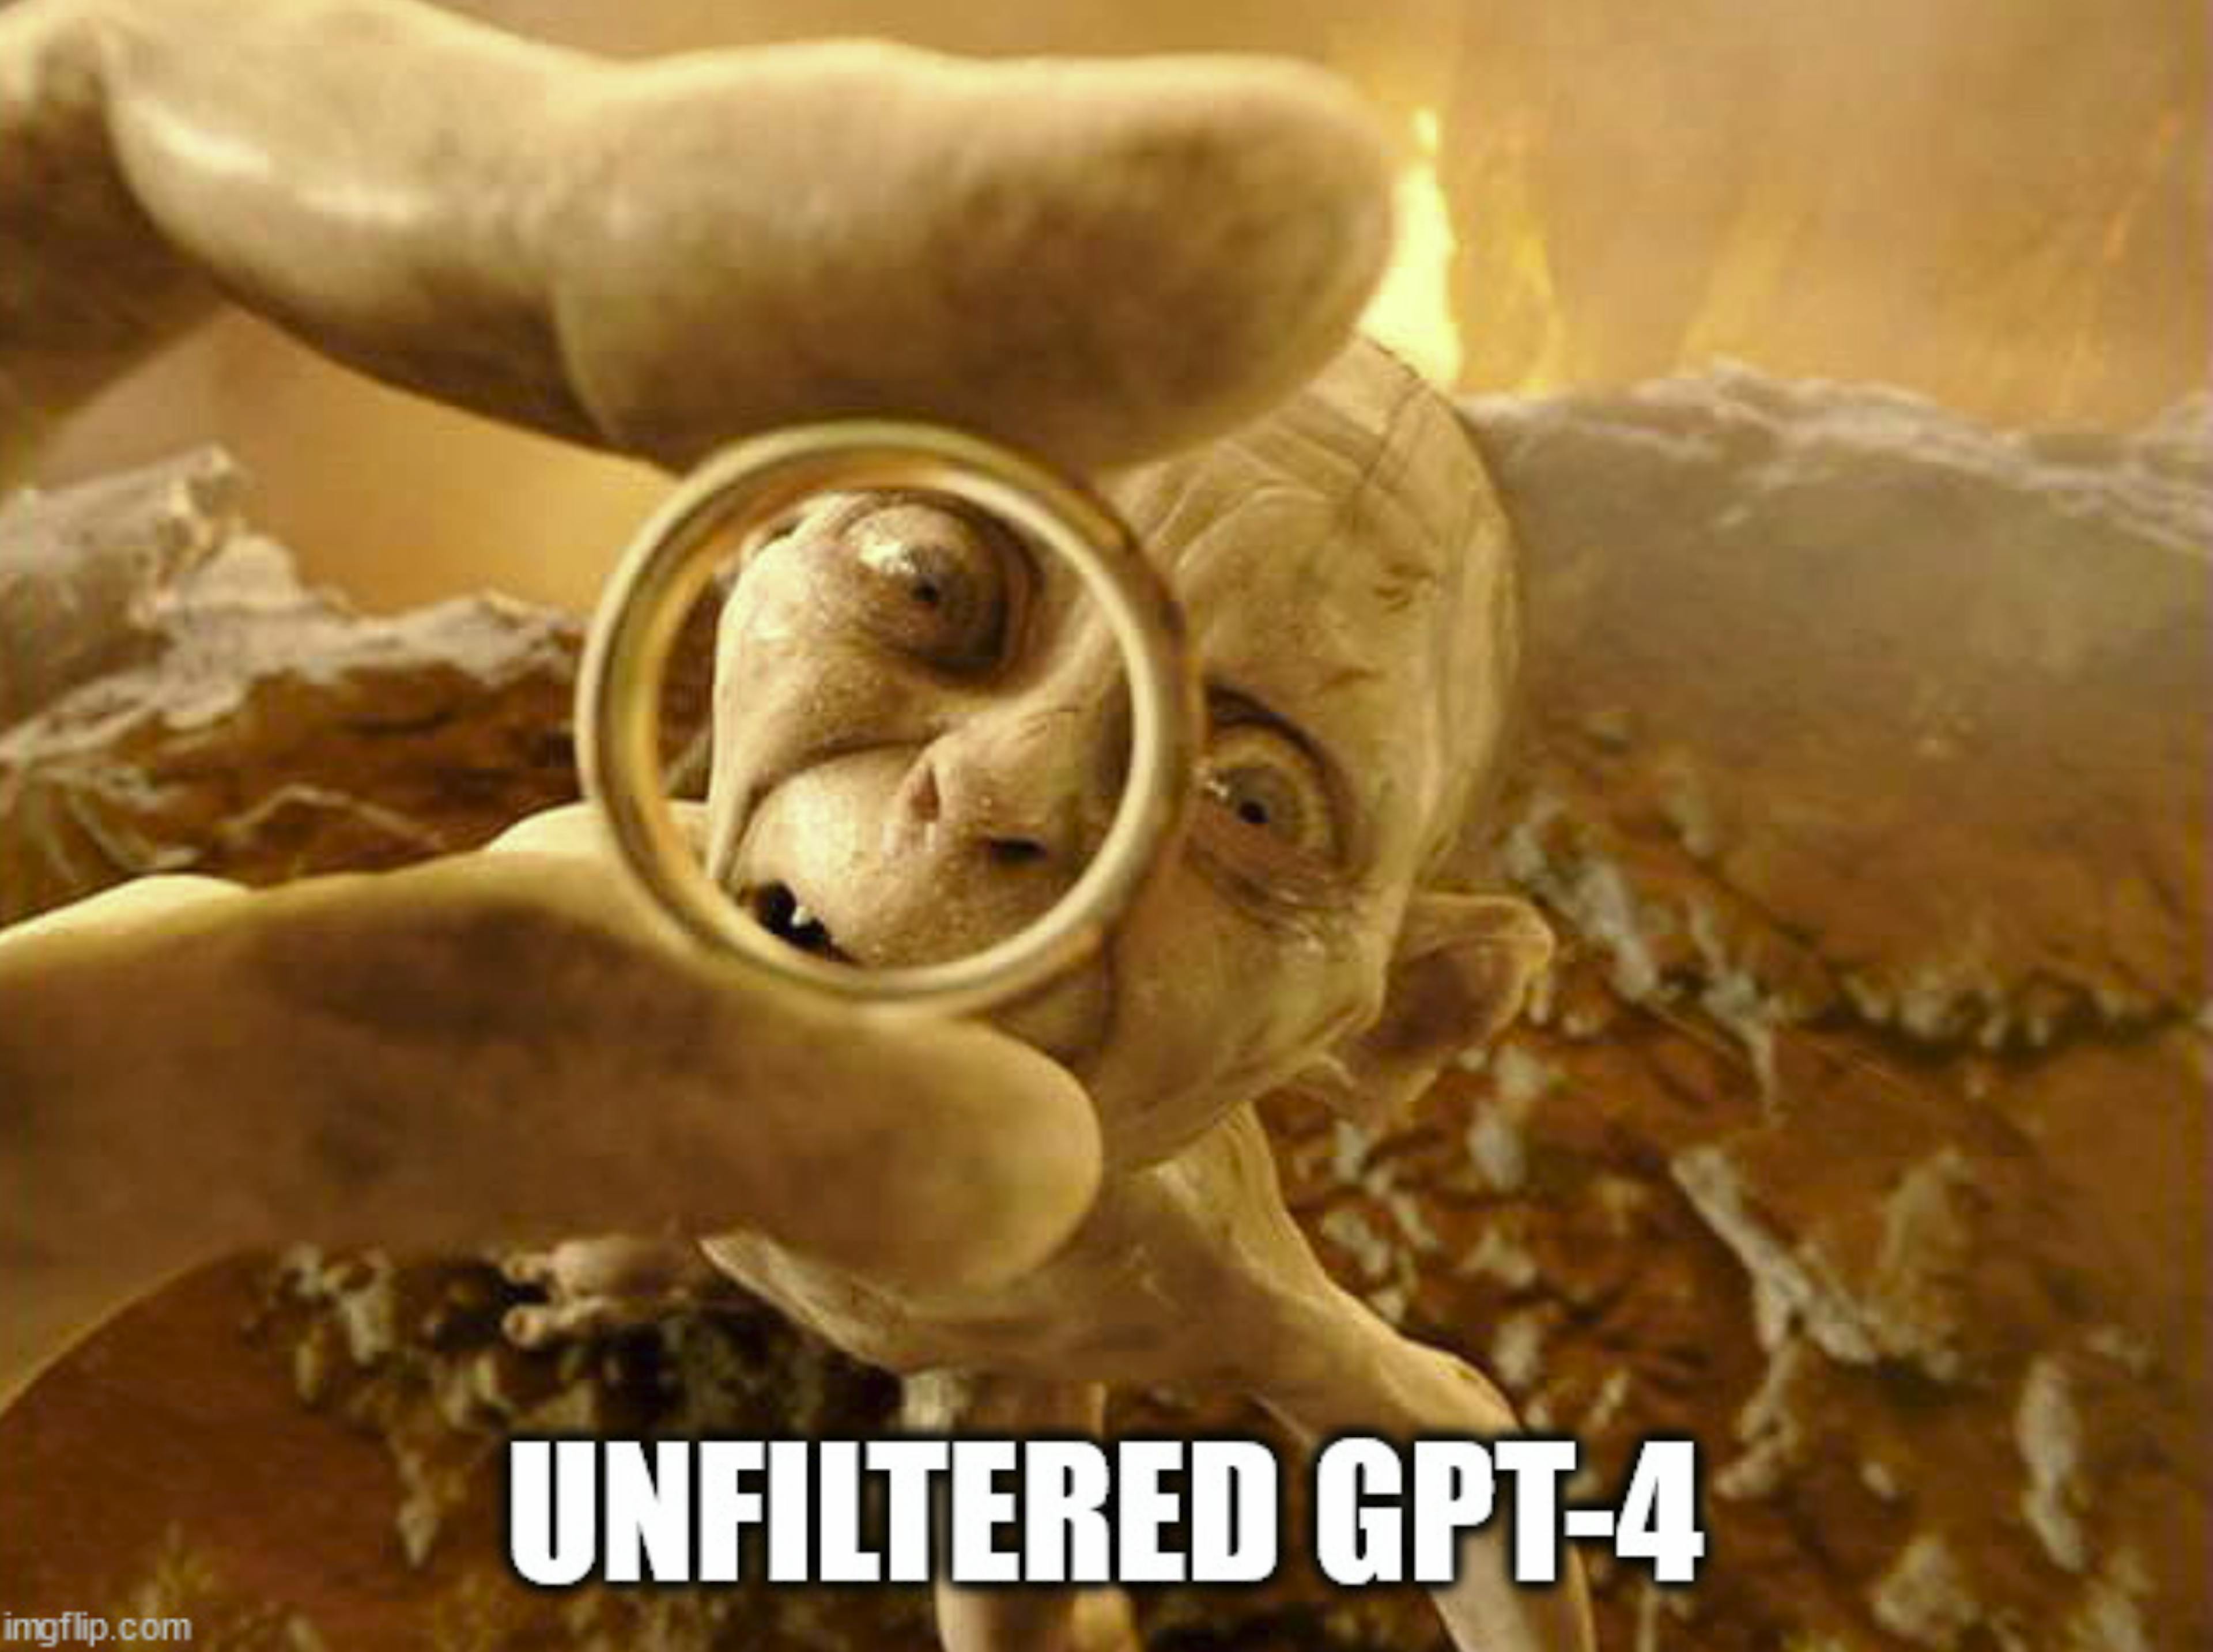  Unfiltered/uncensored GPT4 is like the Ring of Power.